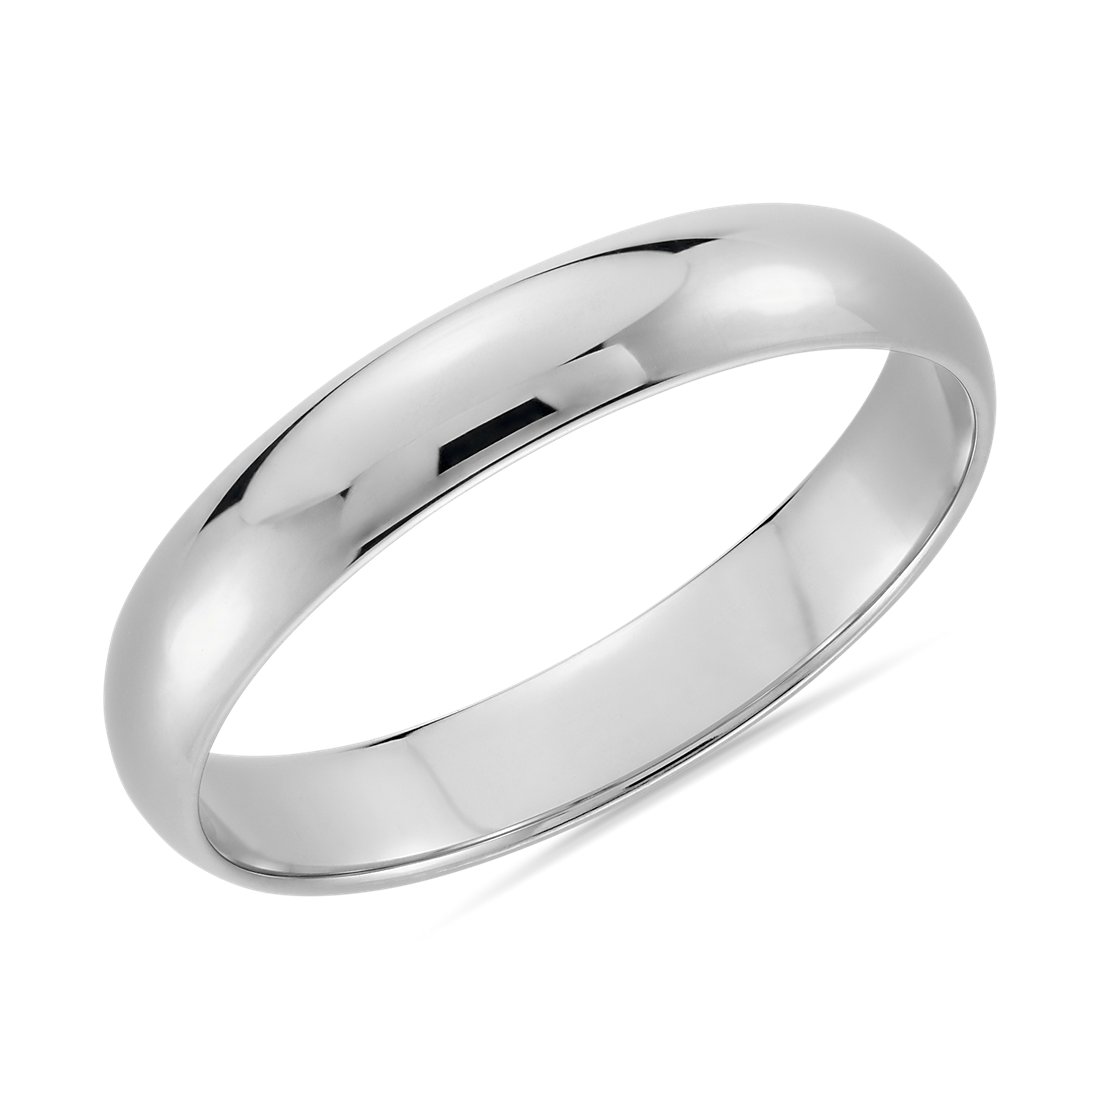 Guide For Buying The Perfect Men's Wedding Band